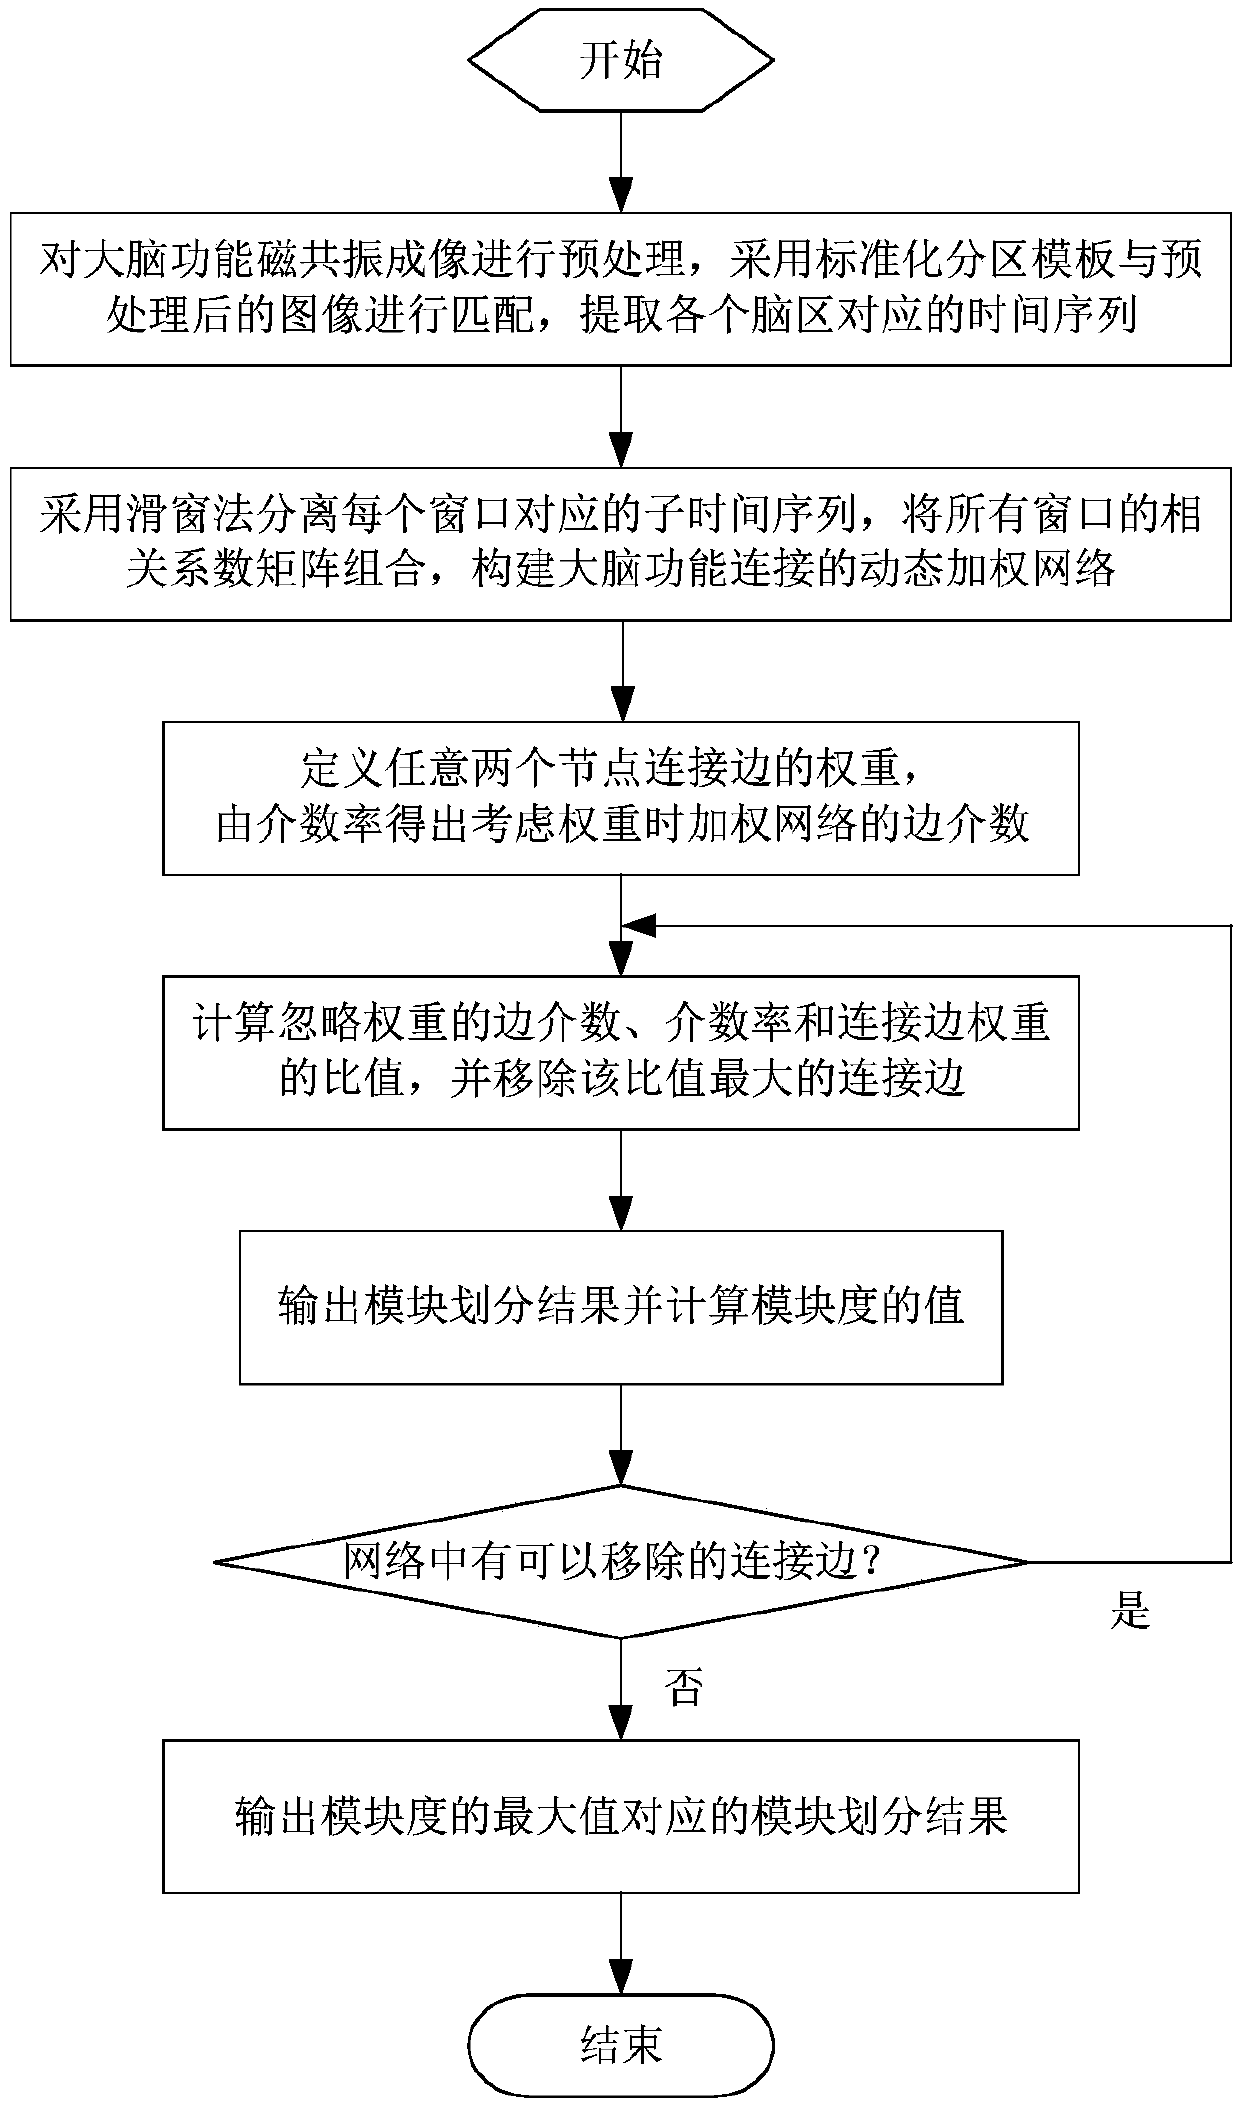 Brain function connection module division method based on weighted network